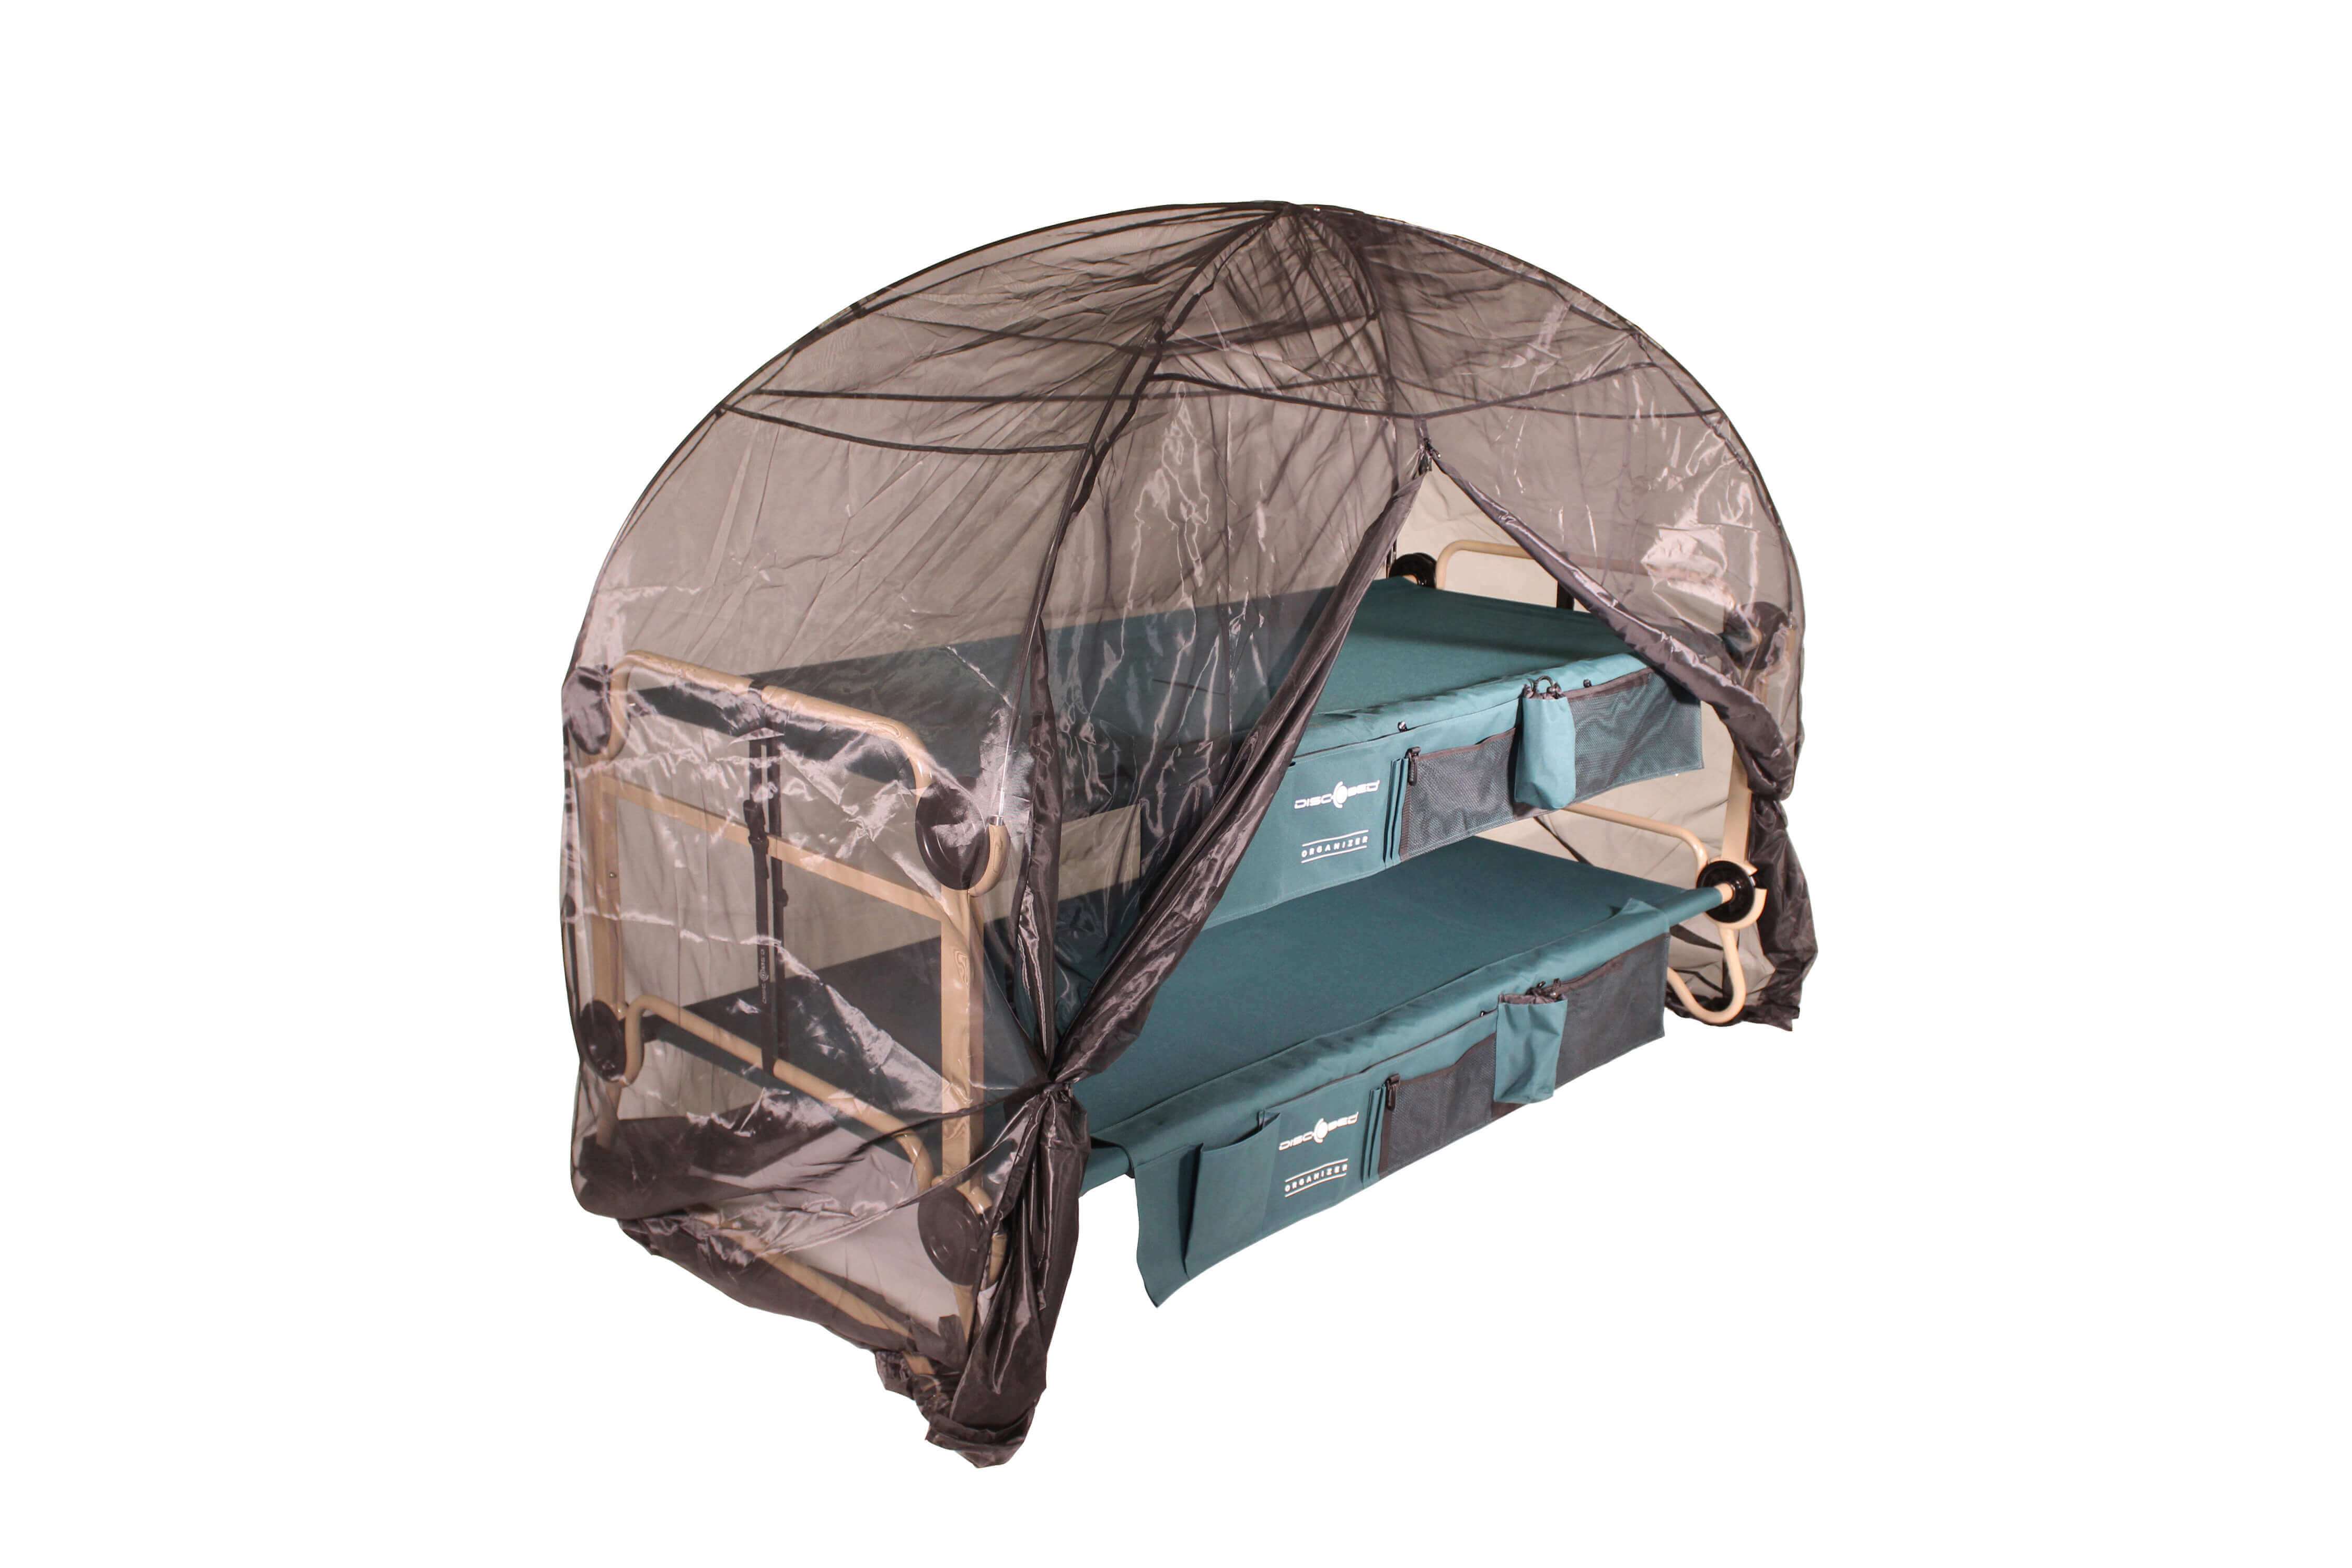 Disc O Bed Mosquito Net For Cot Bunk Beds, Portable Bunk Bed Cots